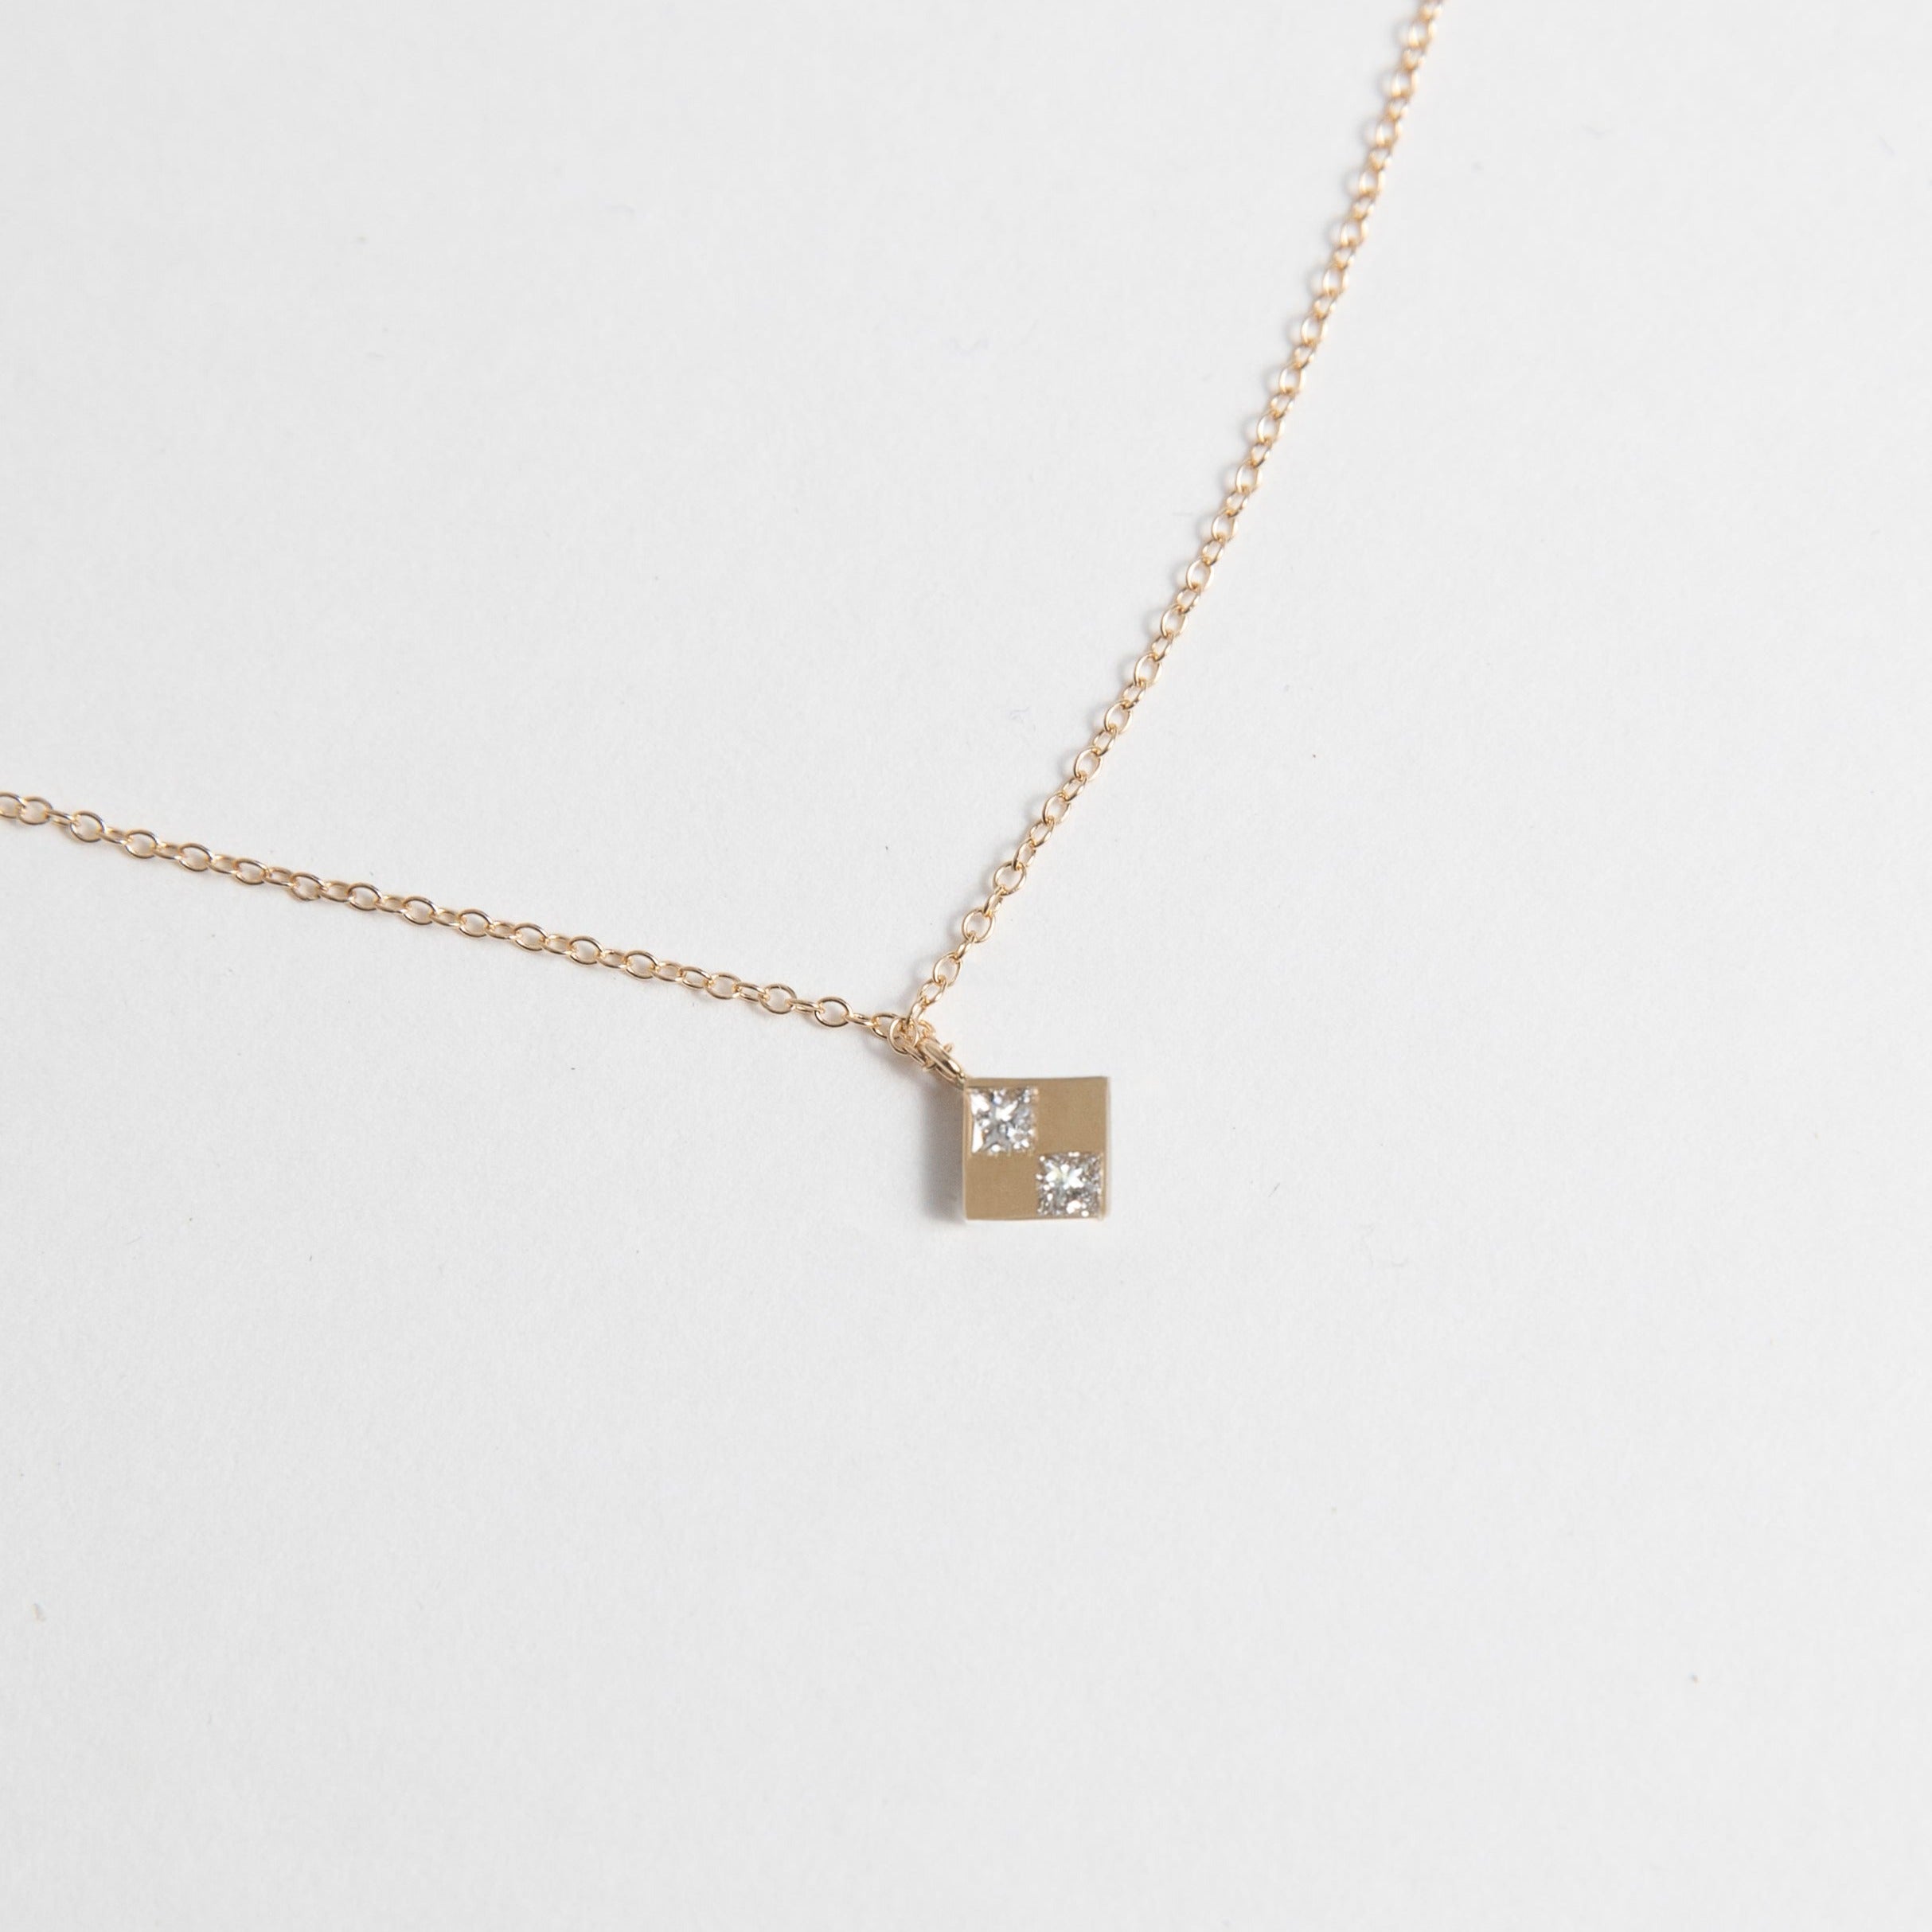 Sedi Unconventional Necklace in 14k Gold set with Princess cut Square Diamonds By SHW Fine Jewelry NYC